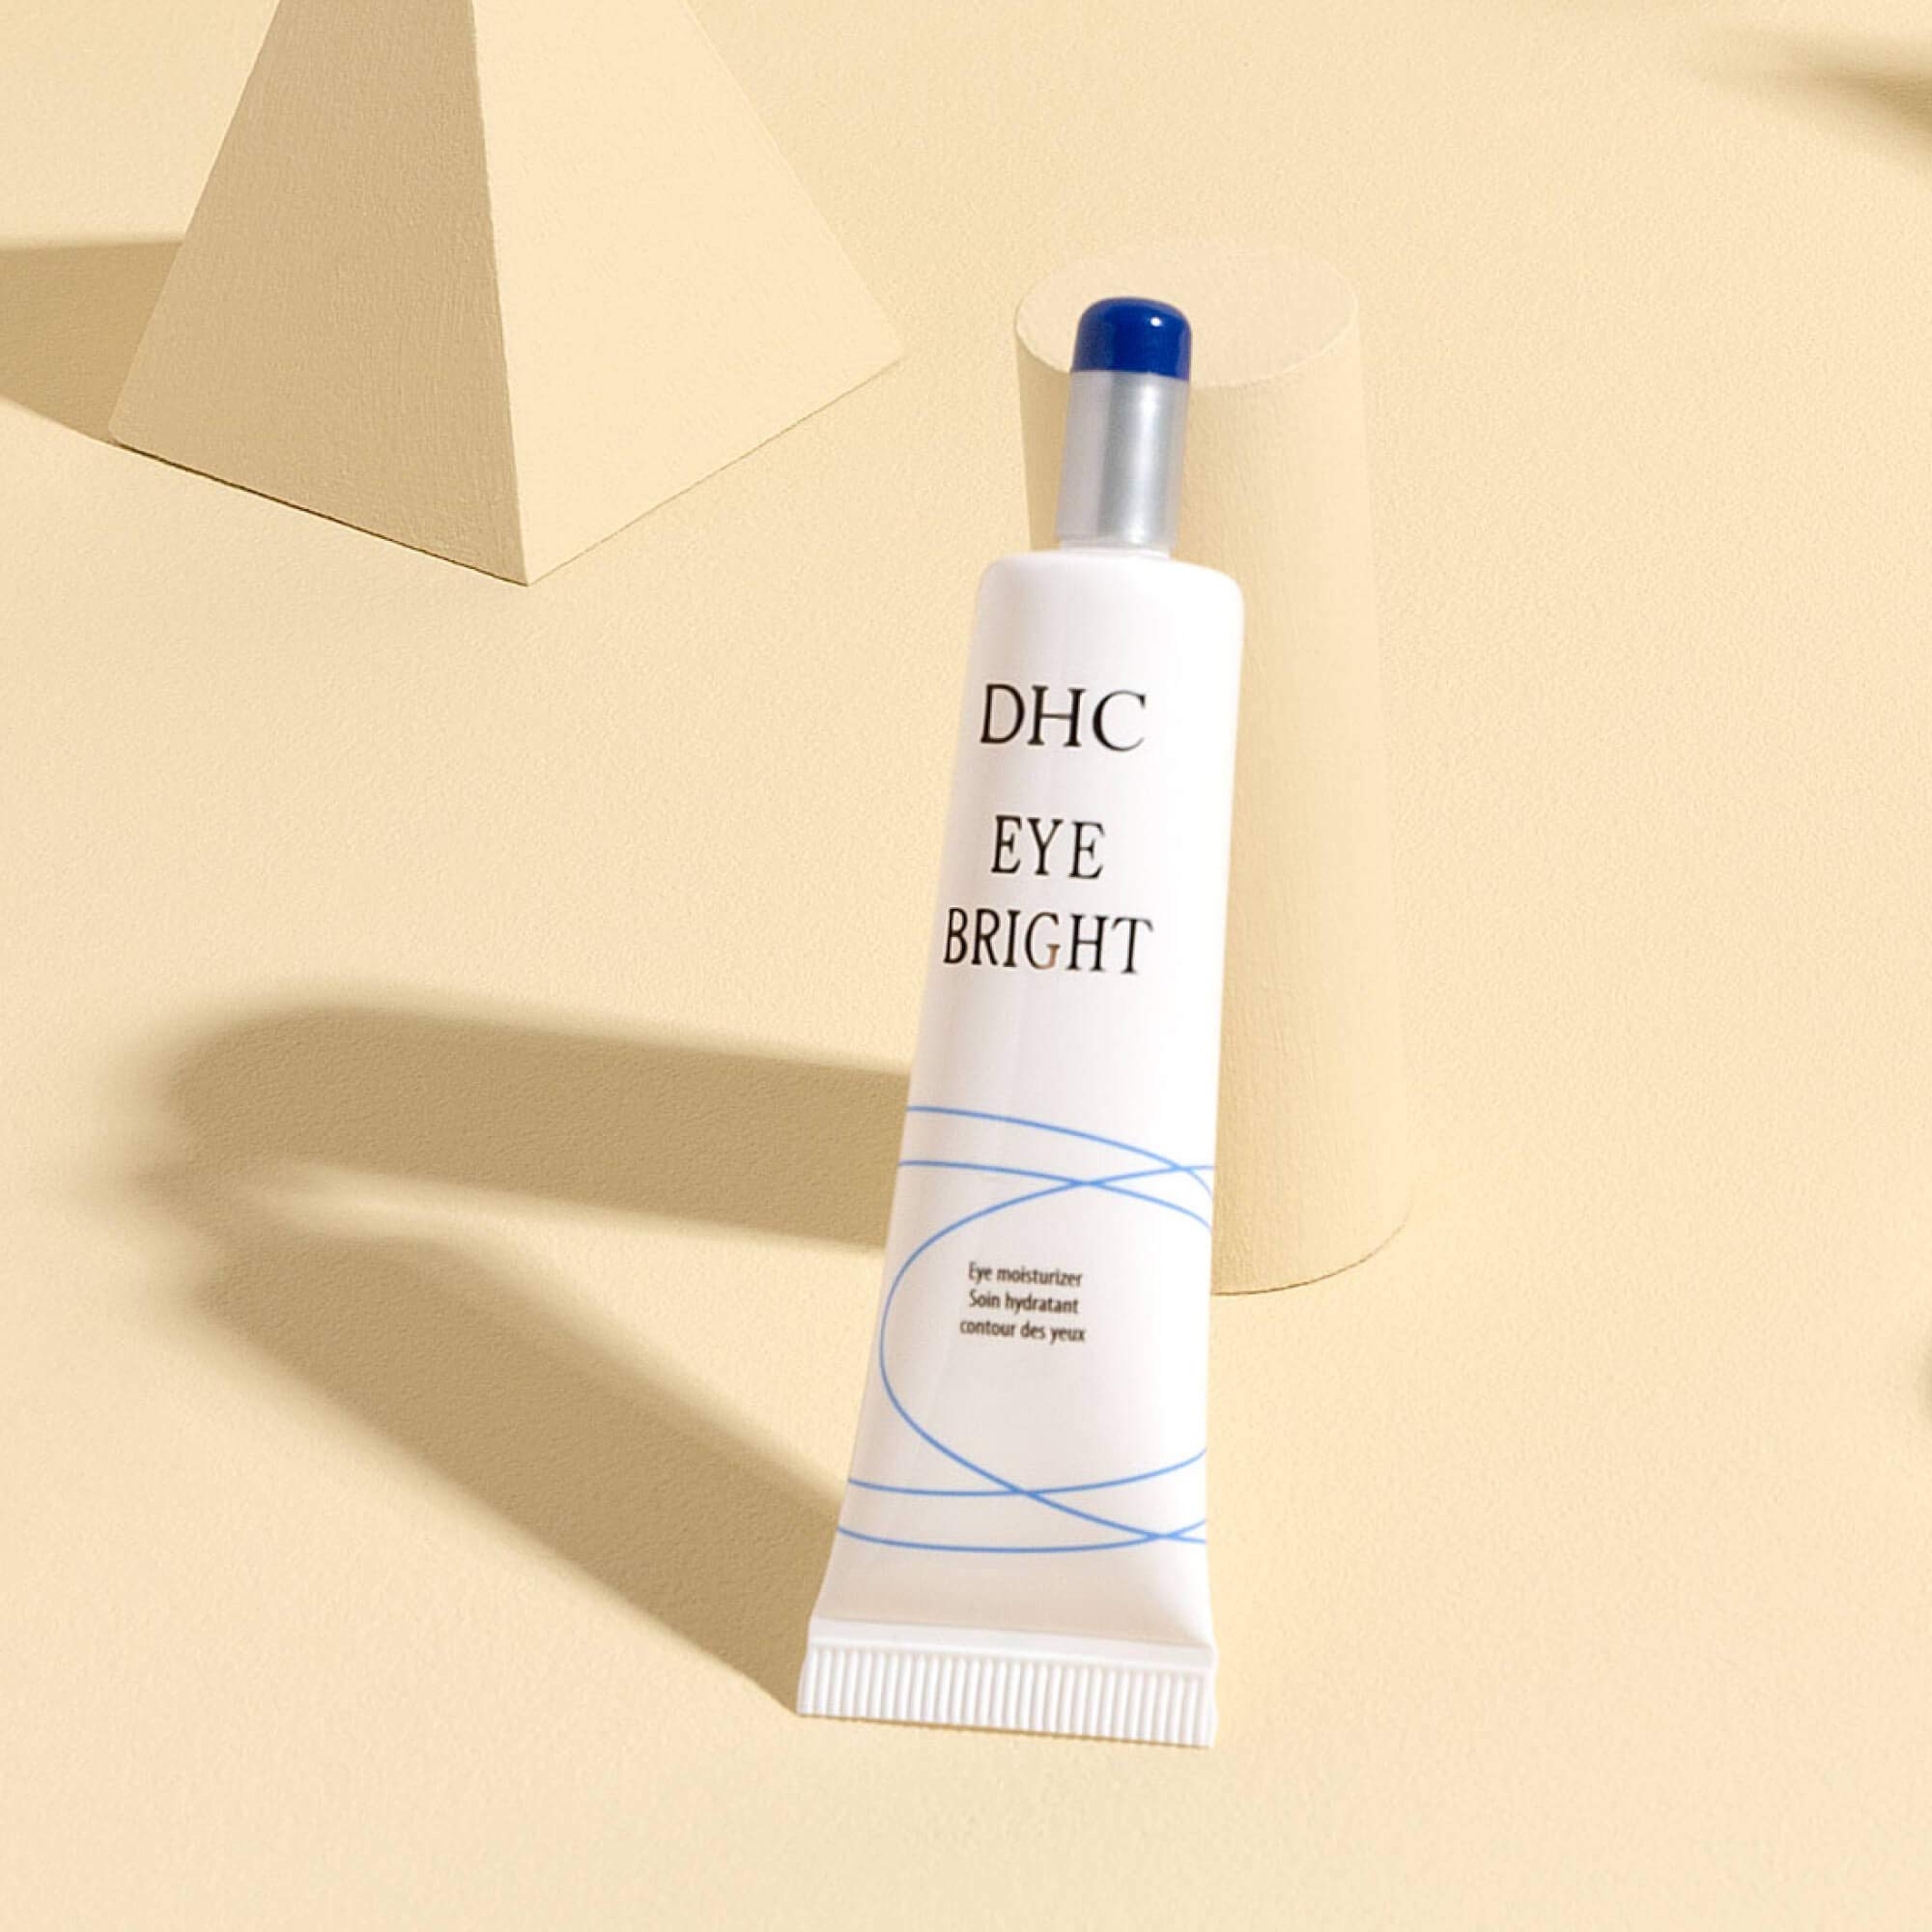 DHC Eye Bright Lightweight Eye Gel Minimizes Dark Circles and Puffy Eyes Absorbs quickly Daytime and Nighttime Use Ideal for All Skin Types, Clear, 0.53 Fl Ounce